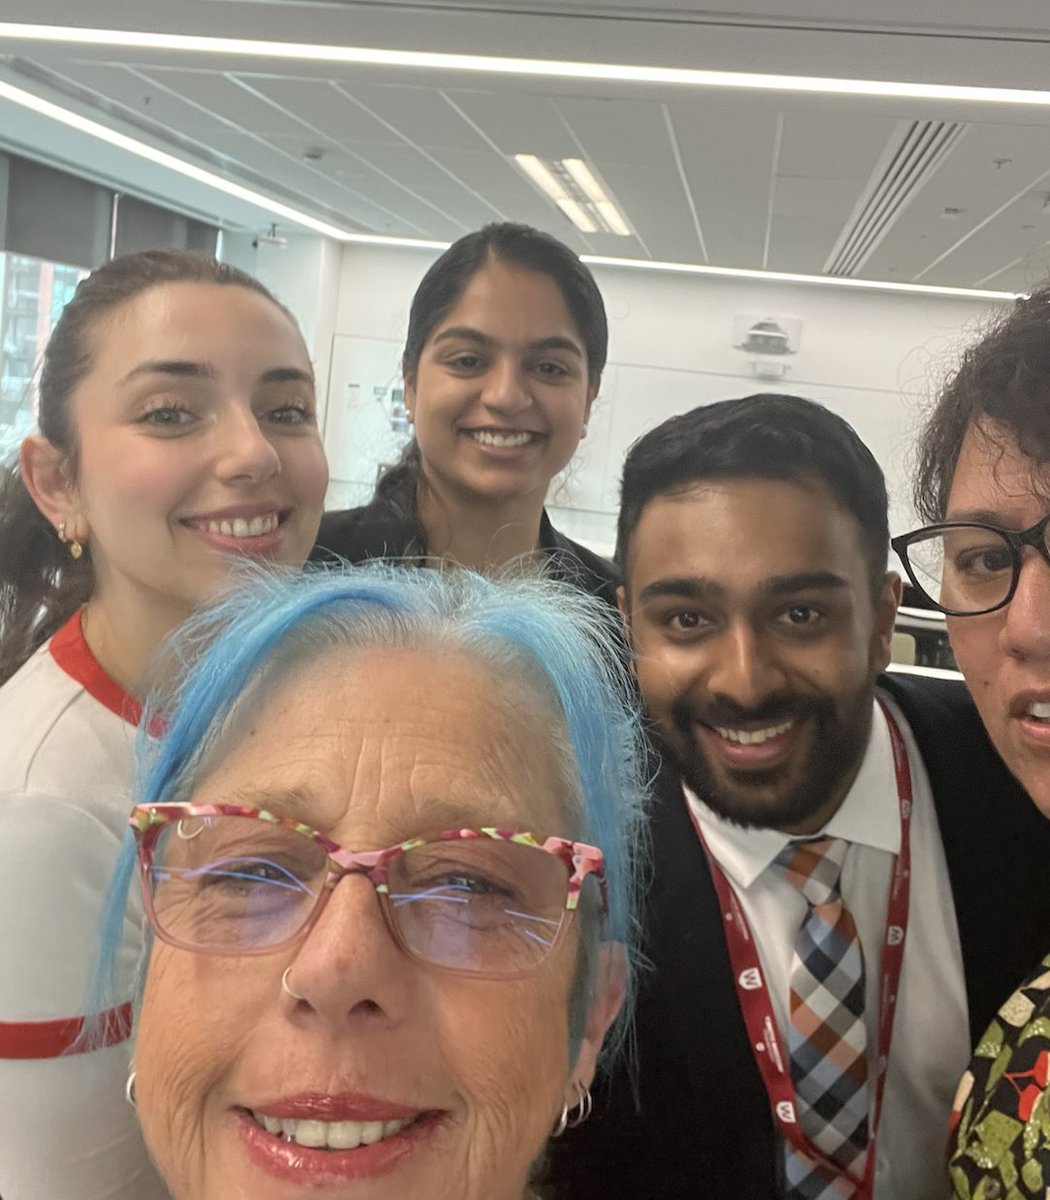 Today's #westernsap @wsu_sap activity - we're doing a keynote this morn for #ACAPConference 'Improving educational practice through partnership: co-inquiry as scholarship' #westernsap @westernsydneyu #studentsaspartners. Thanks @GinaSalibaa for the invitation with this mob x